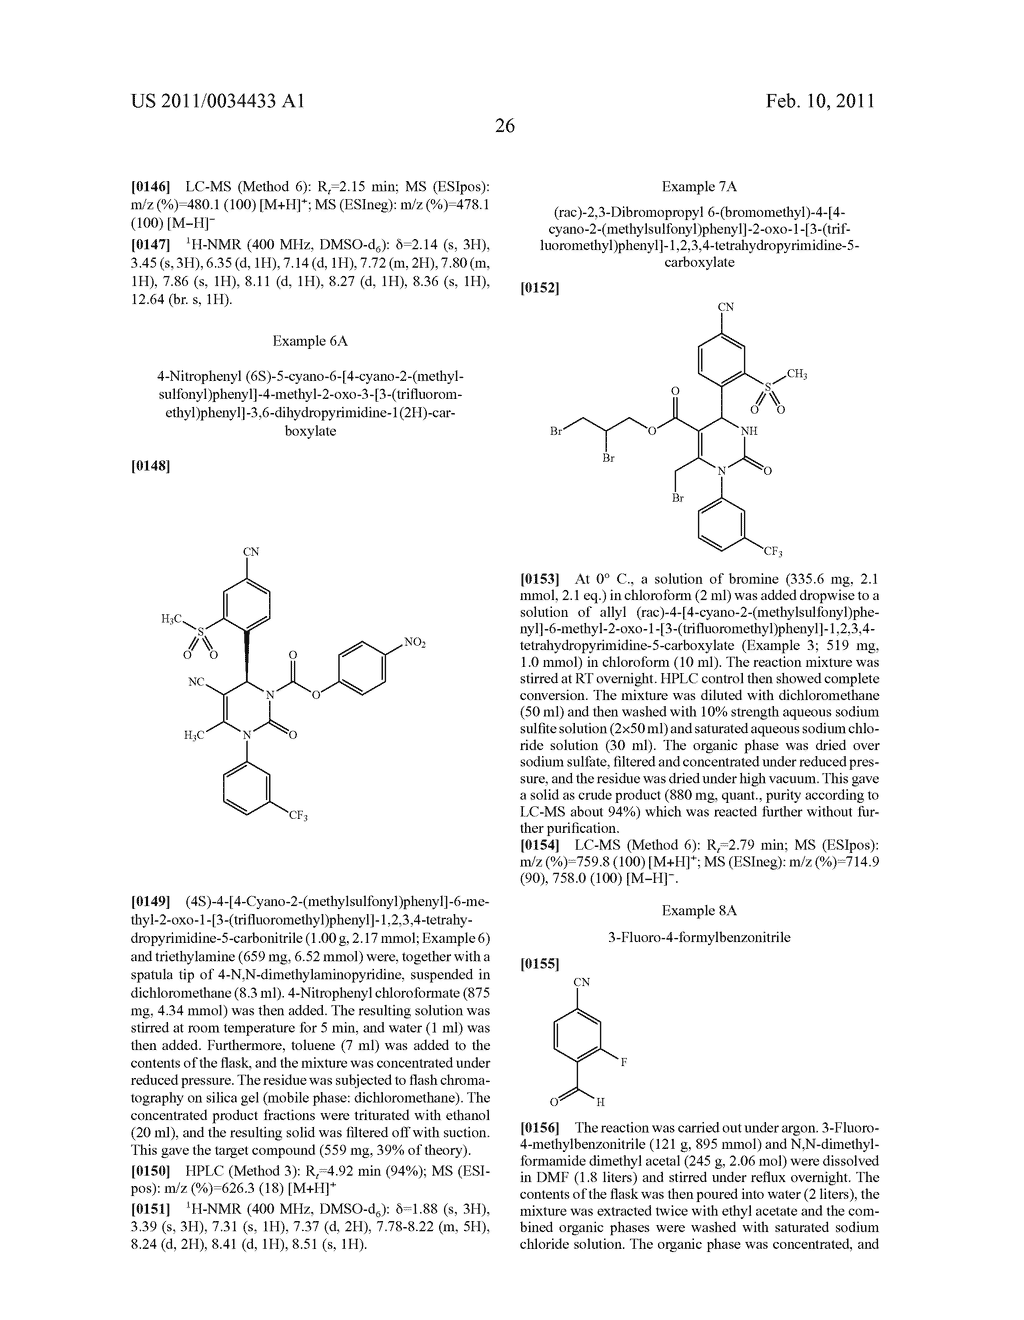 4-(4-CYANO-2-THIOARYL)DIHYDROPYRIMIDINONES AND THEIR USE - diagram, schematic, and image 27